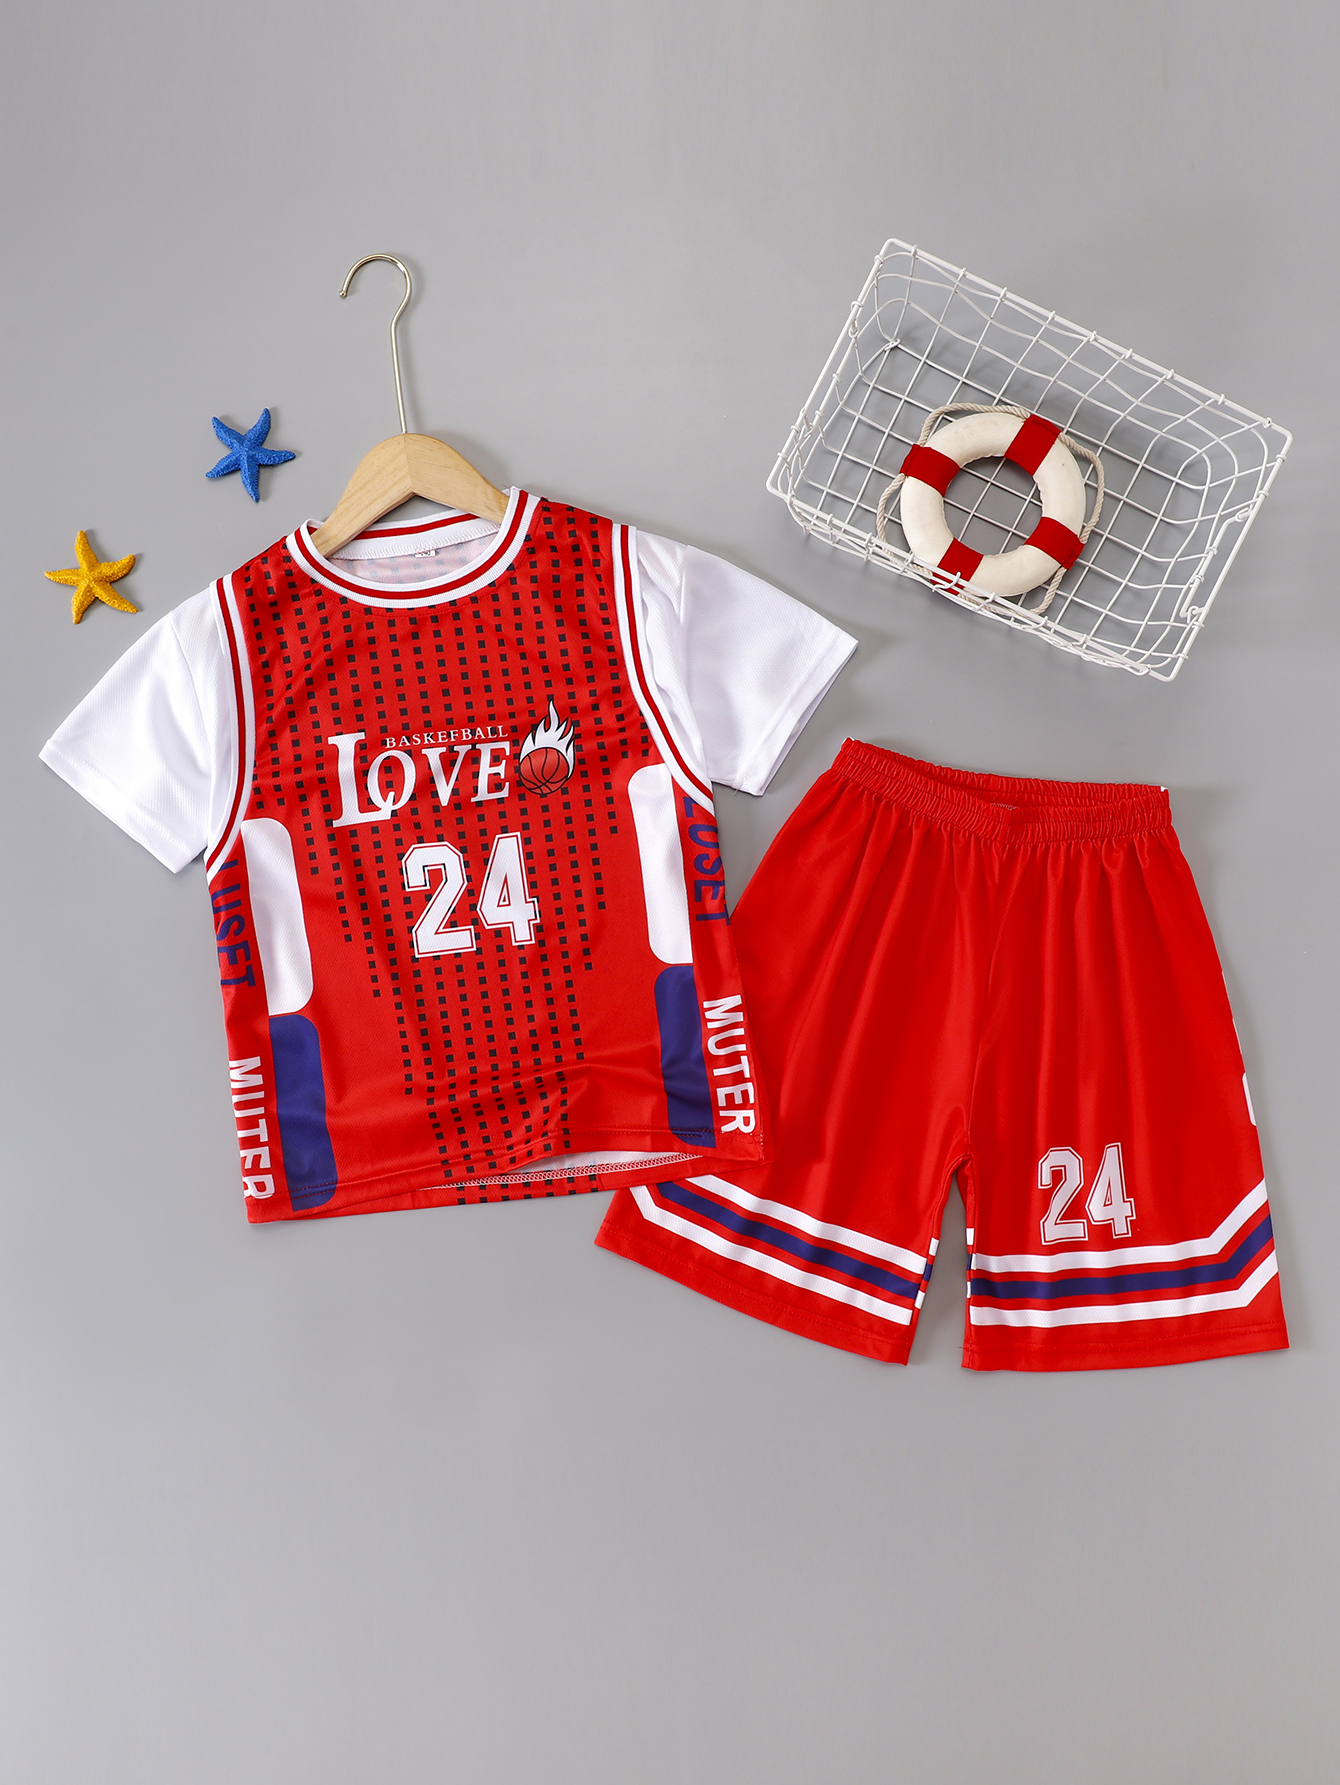 Boys Basketball Suit Sports Outfit Short Sleeves Round Neck Tops